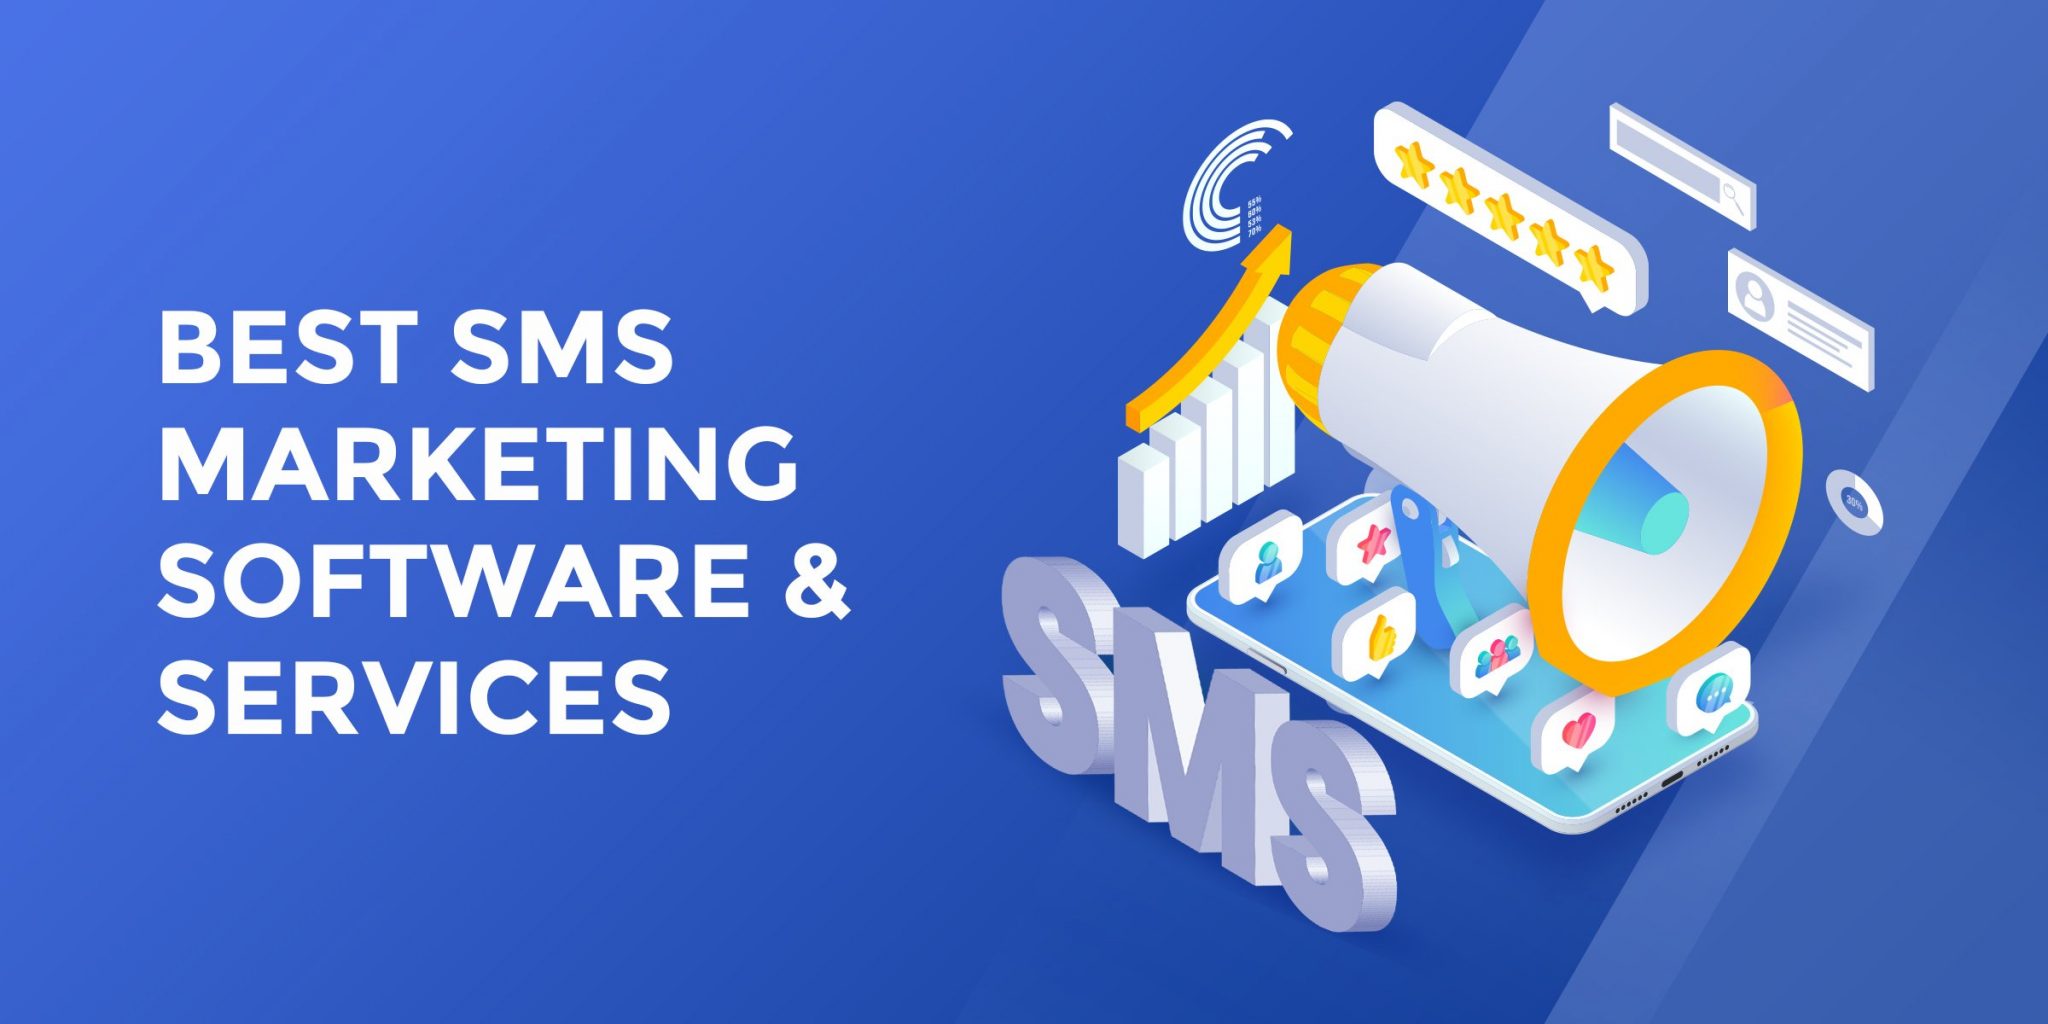 Benefits of SMS Marketing Software - Techarticle